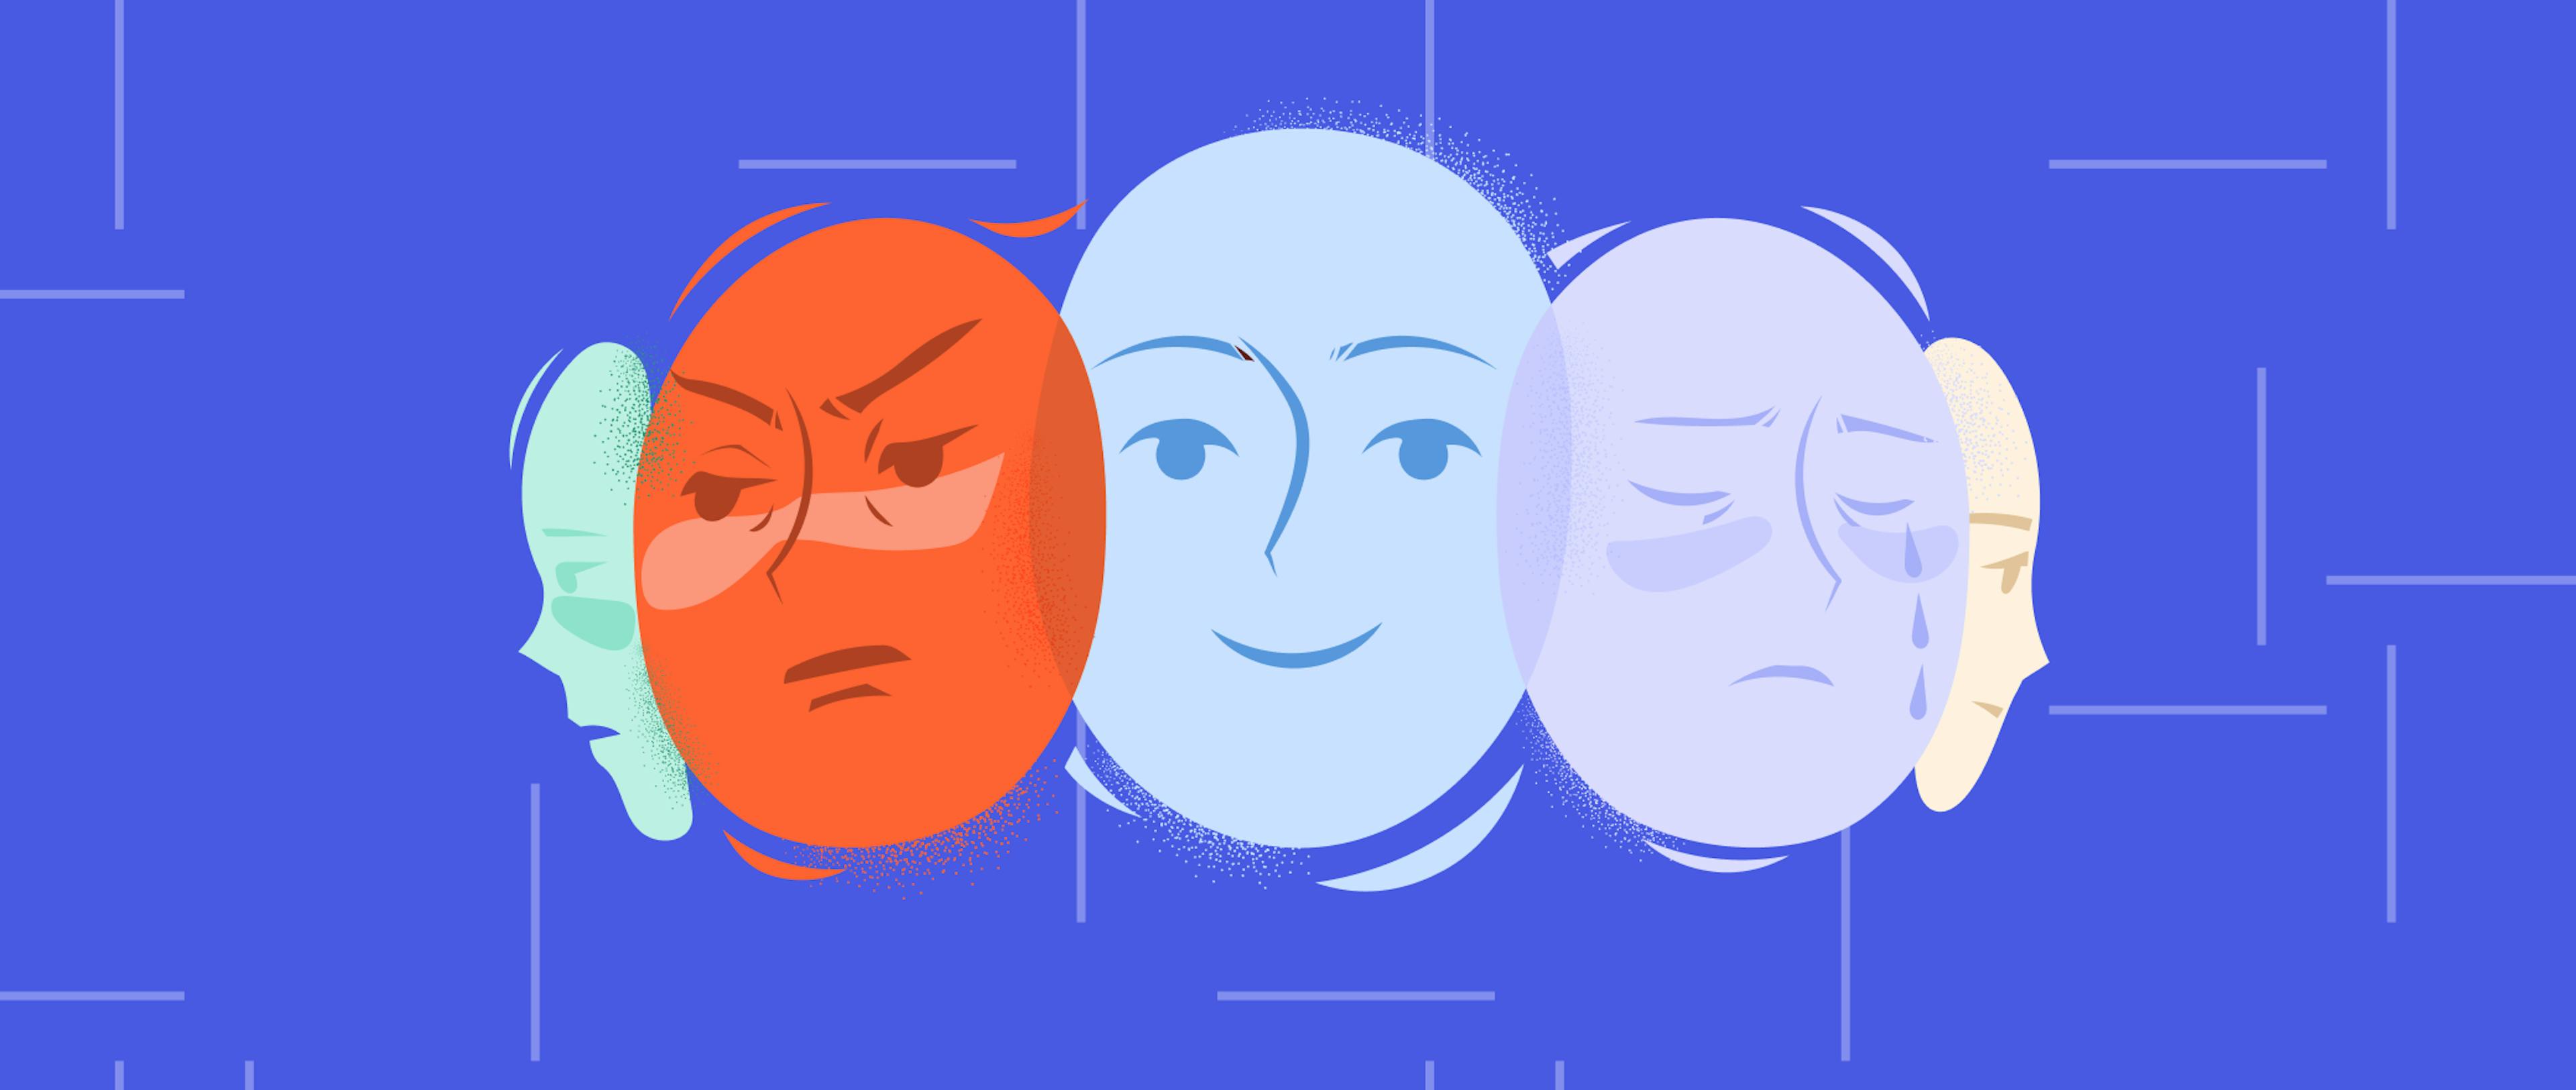 Illustrations of 5 faces donning different expressions - ranging from happy to angry - to depict a person's multiple personalities or facets.
